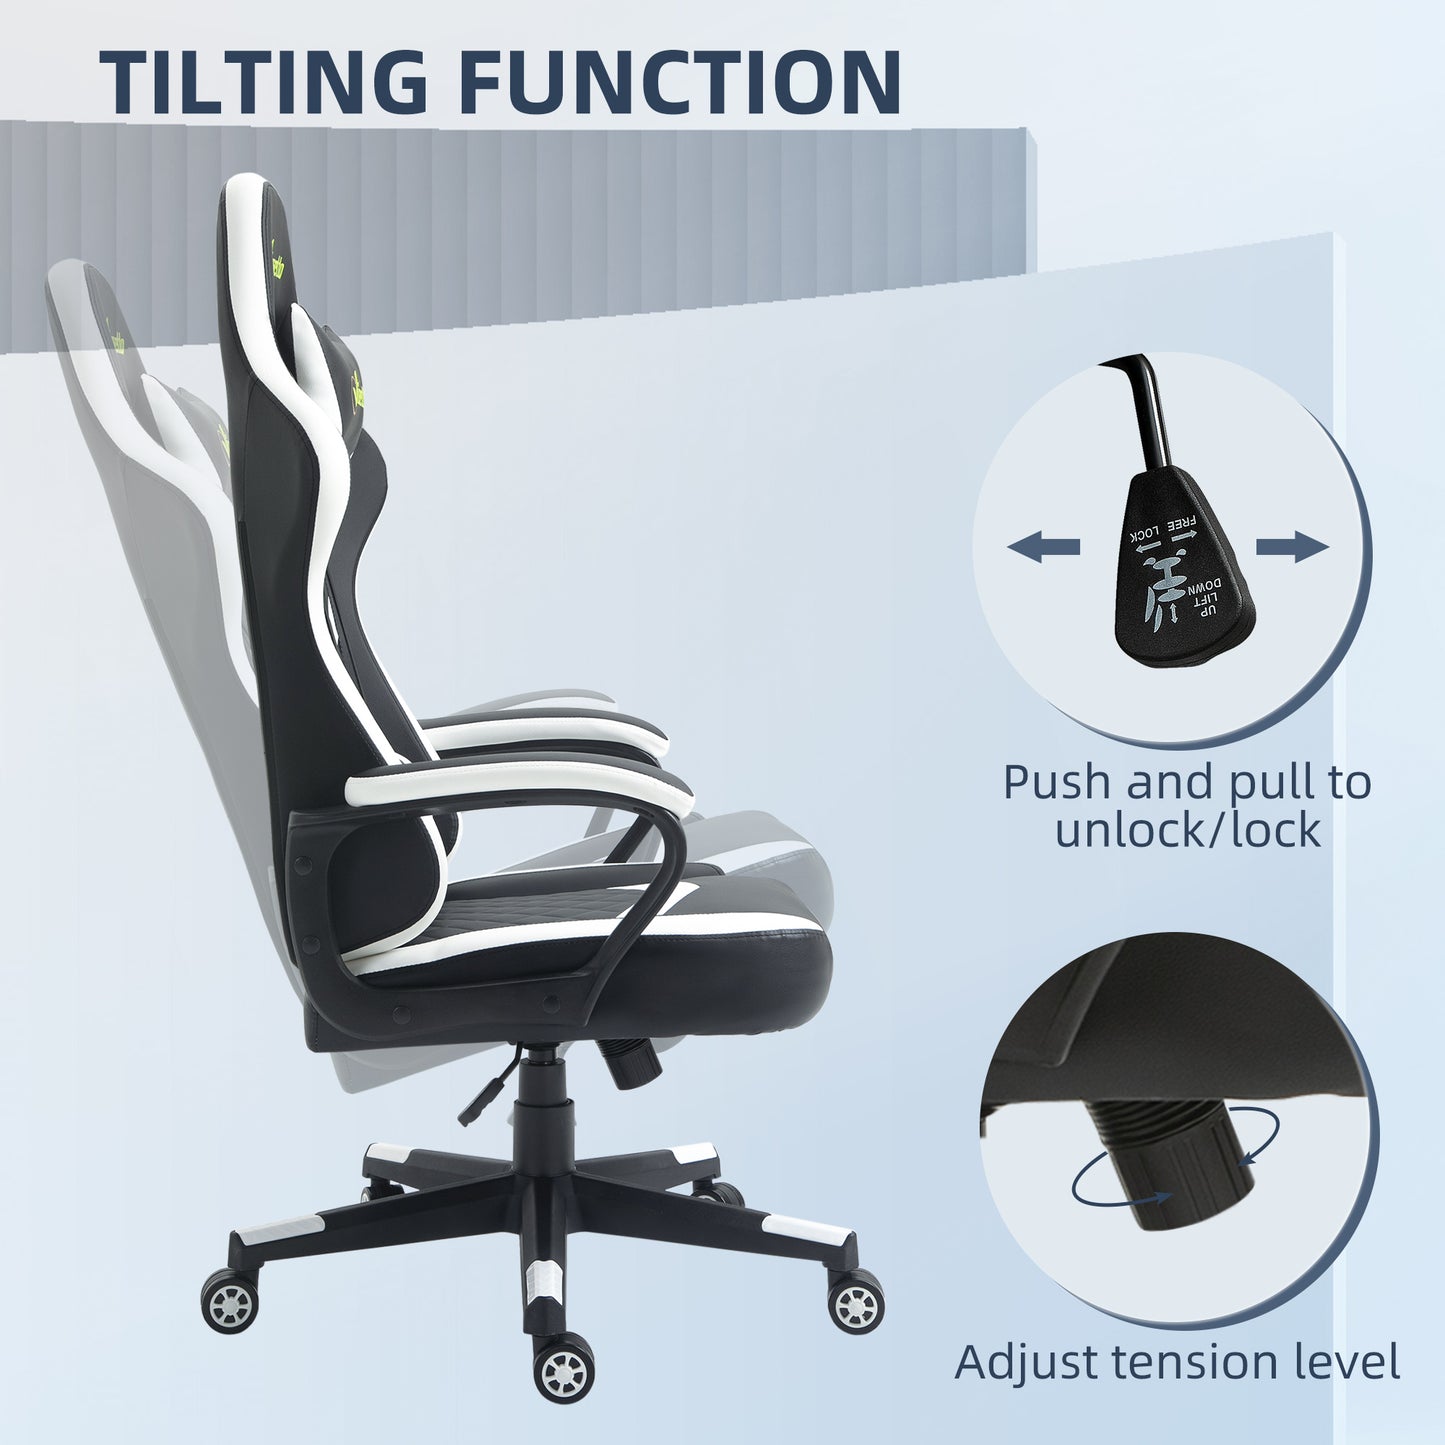 Vinsetto Racing Gaming Chair with Lumbar Support, Headrest, Swivel Wheel, PVC Leather Gamer Desk Chair for Home Office, Black White